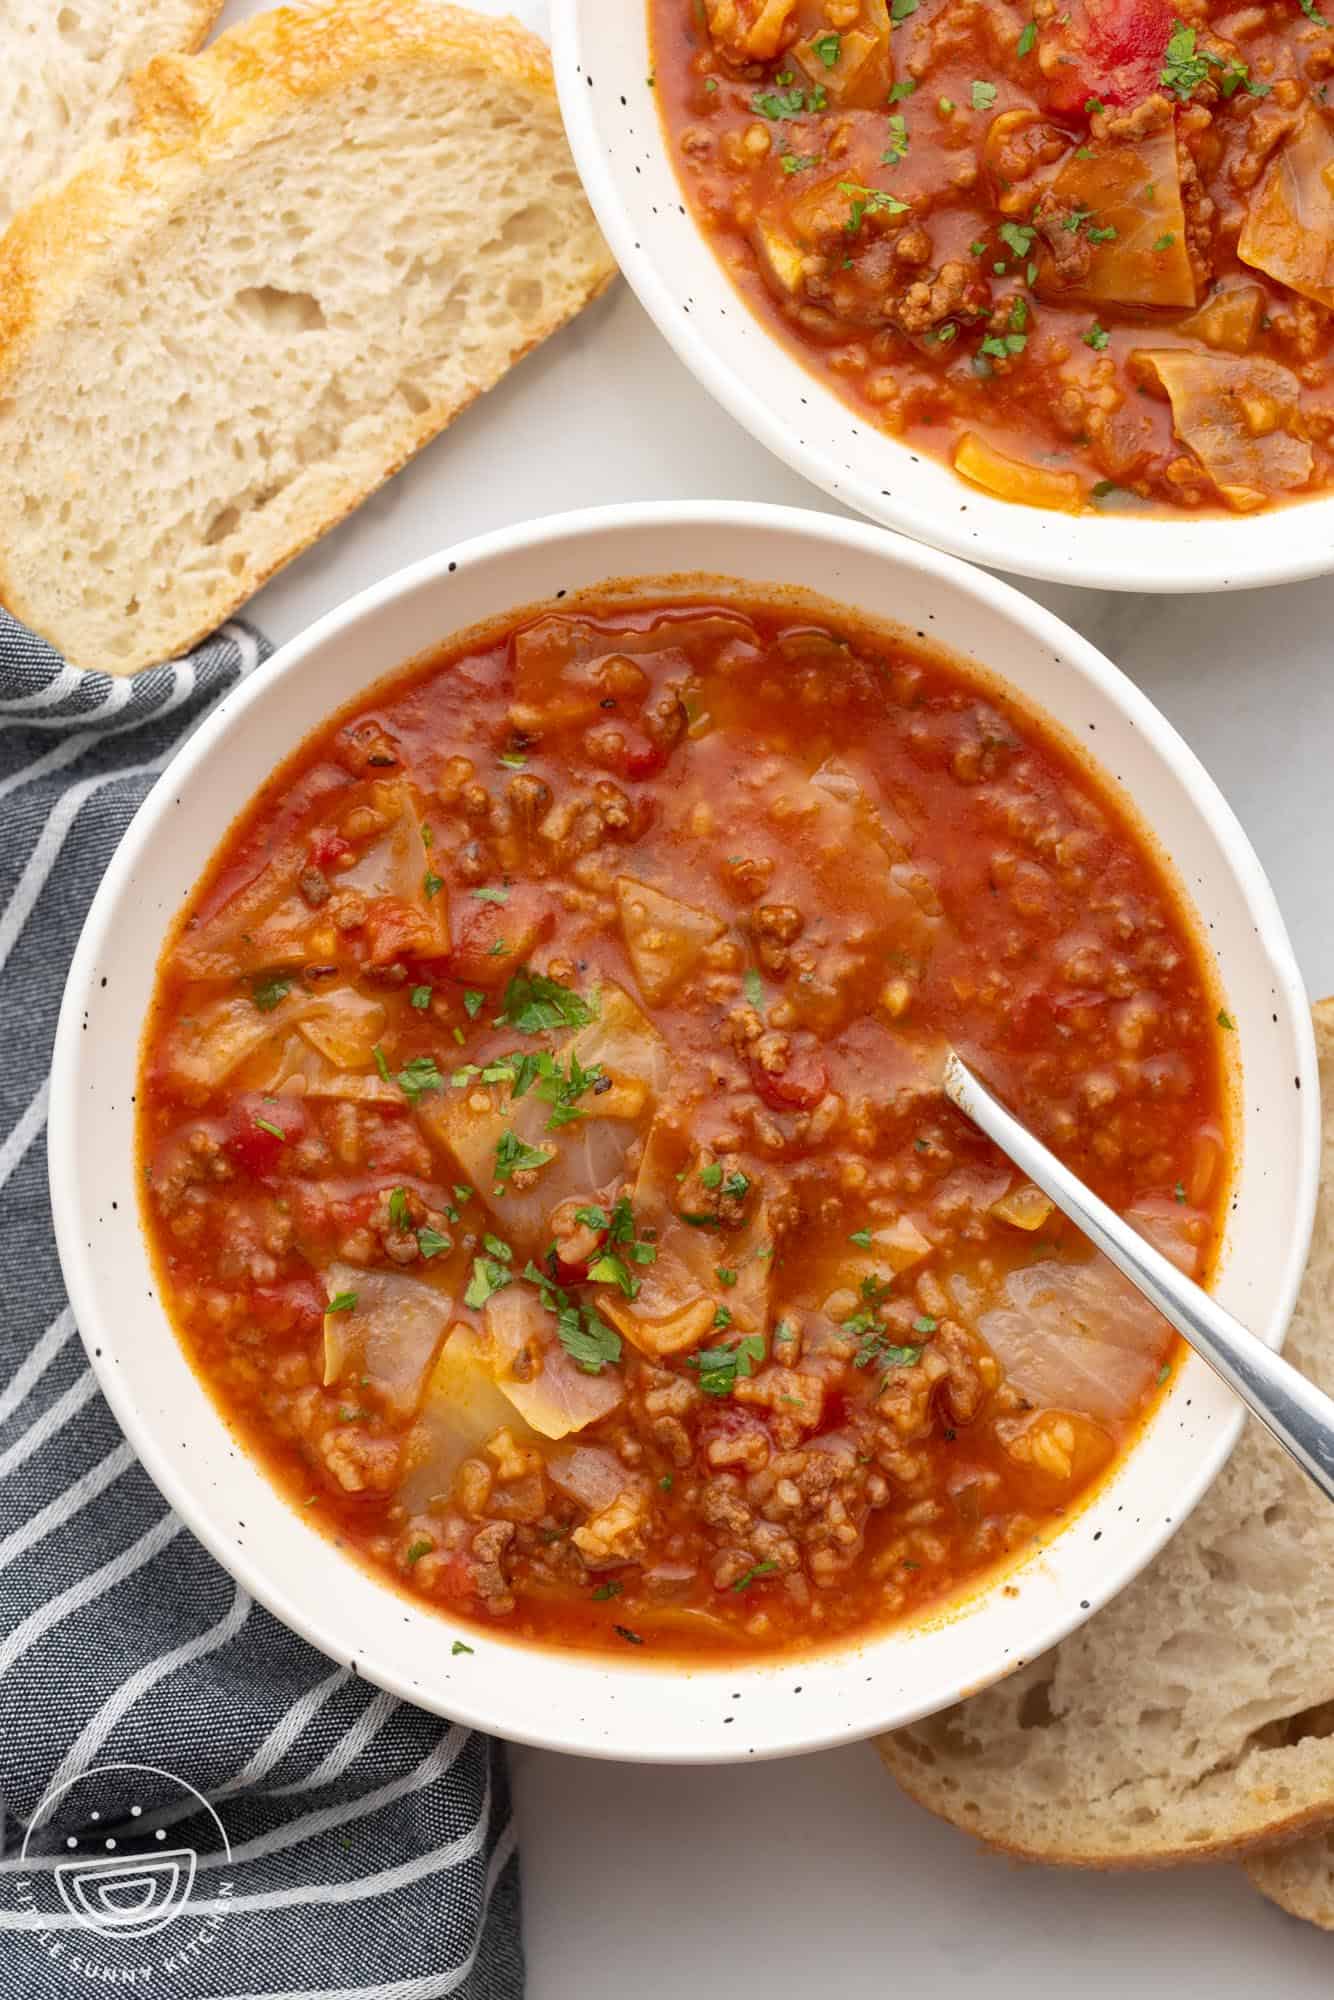 stuffed cabbage soup in serving bowls with fresh bread on the side.